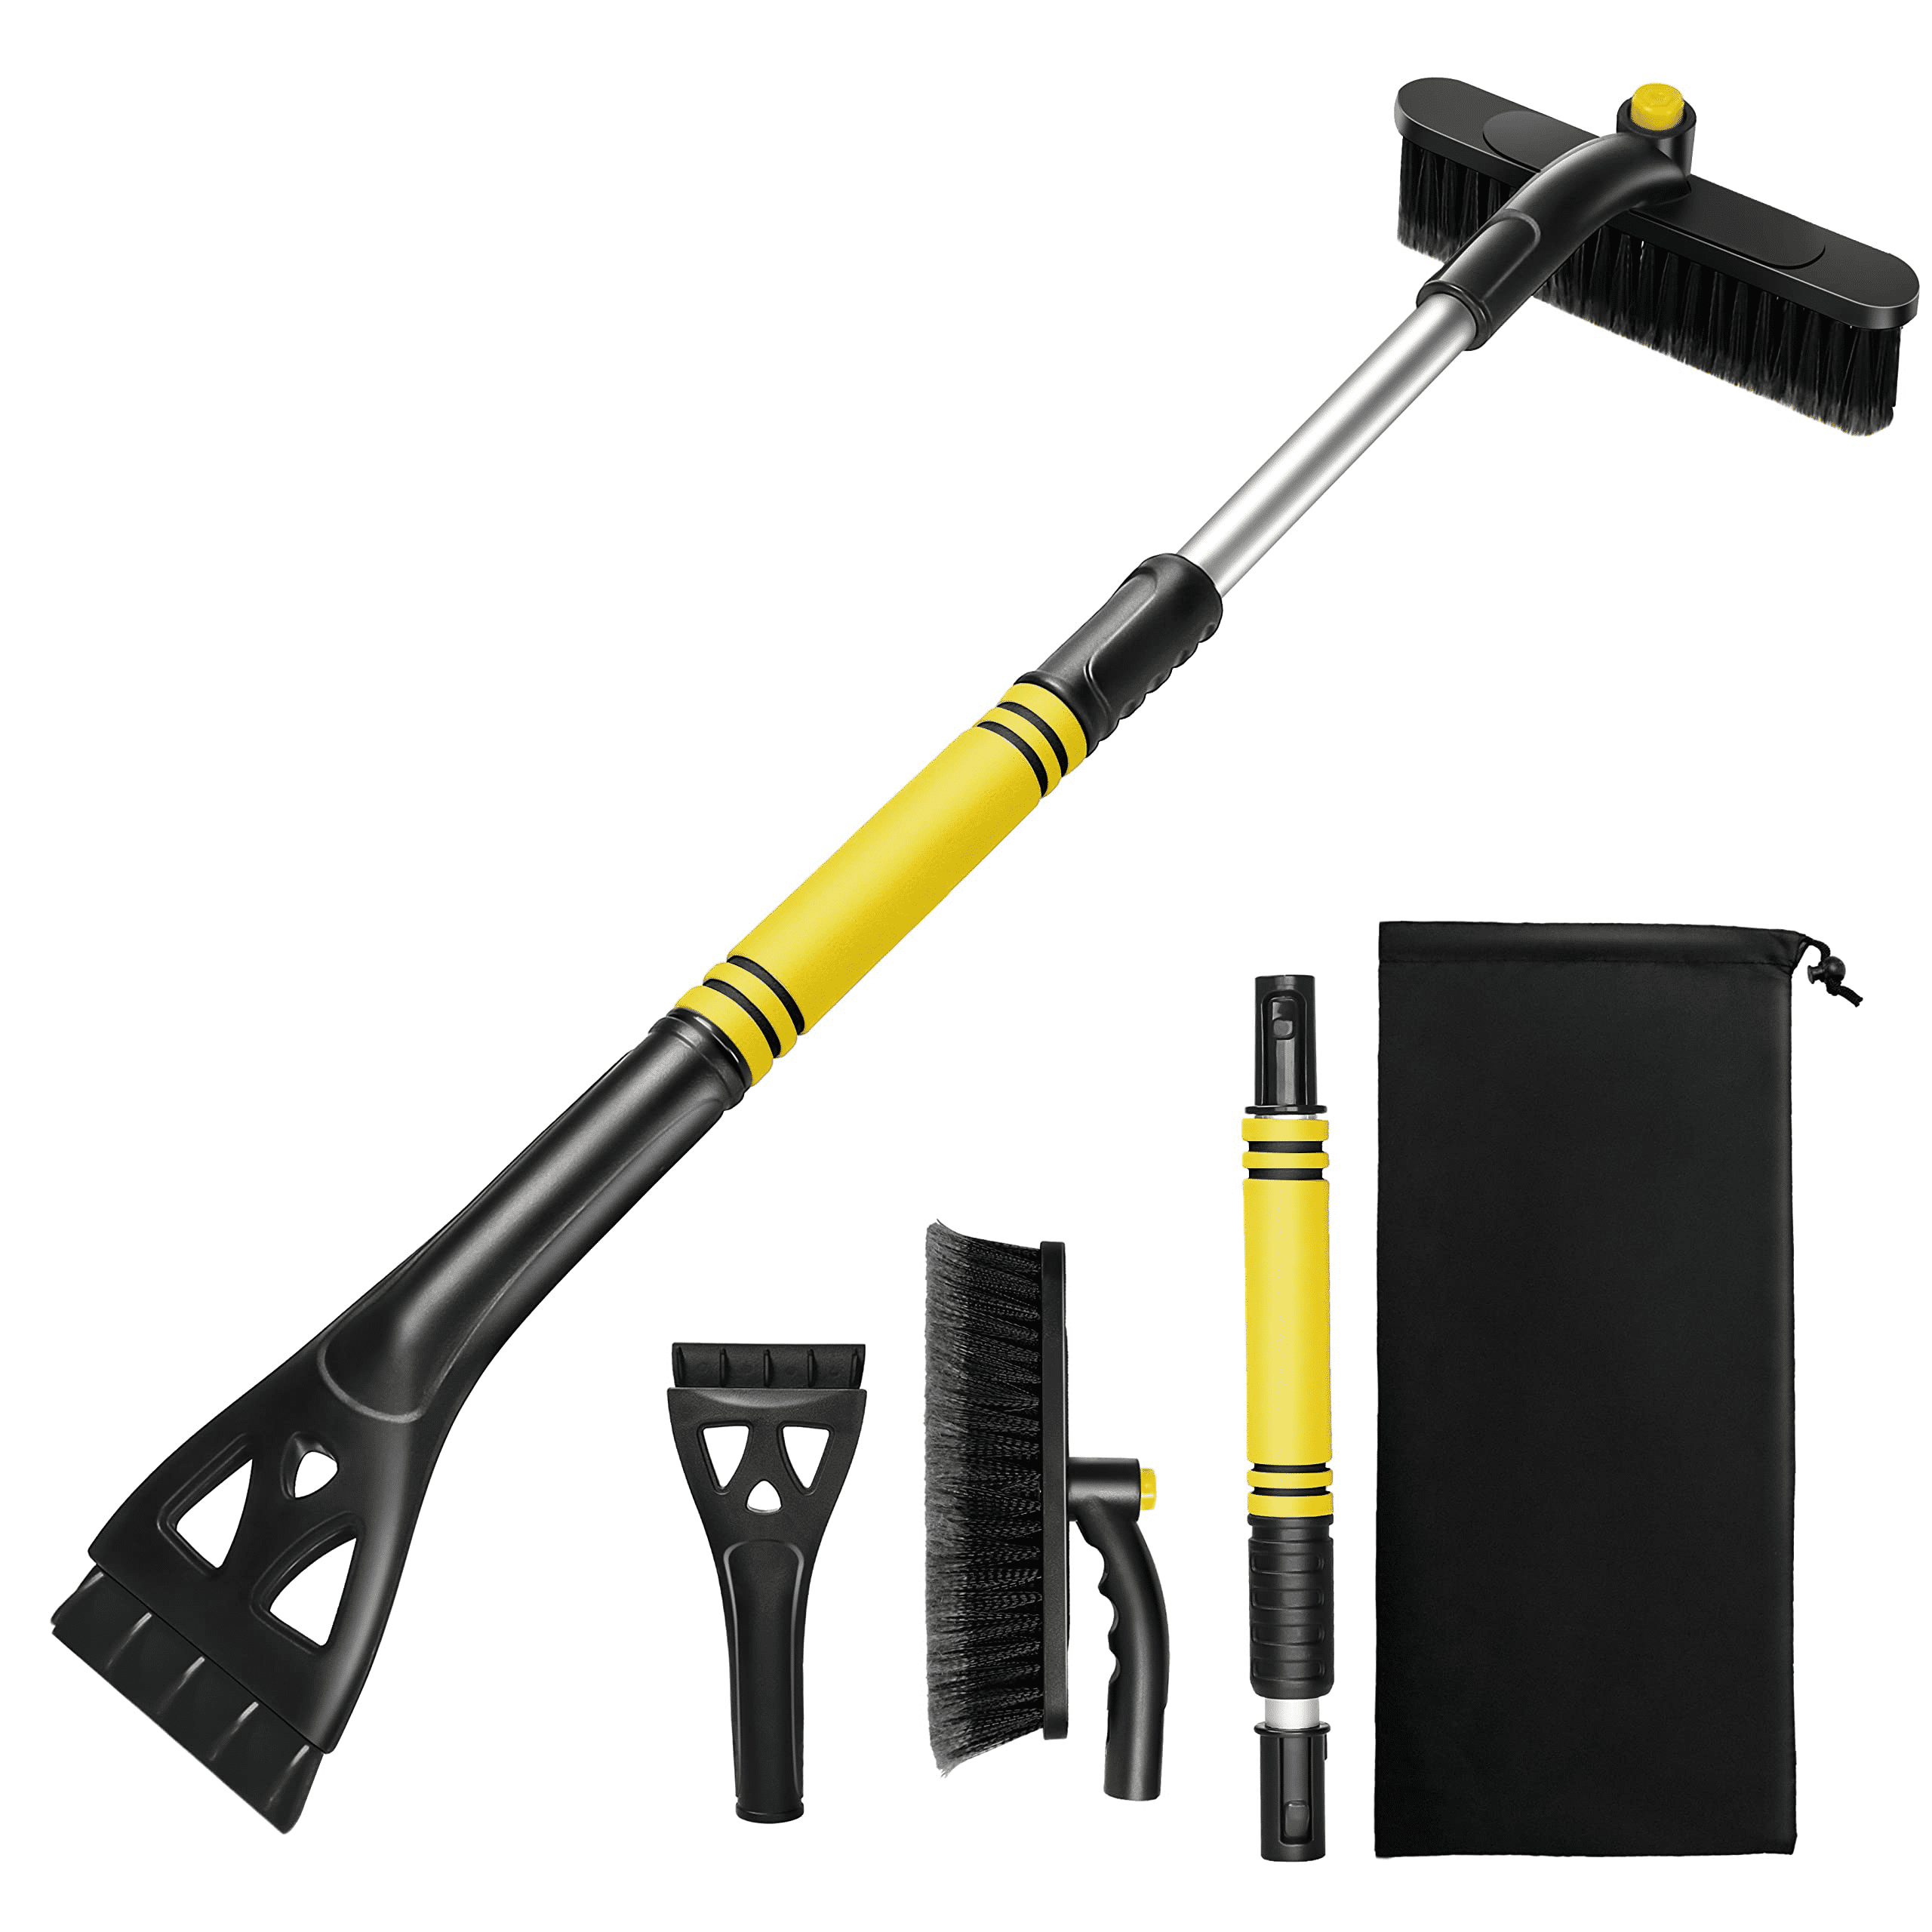 Snow Brush, 3-in-1 Extendable 25.2”-32” Ice Scraper and Snow Brush, Snow  Scraper w/Pivoting Brush Head for Car Windshield Car Vent,Detachable Snow  Removal w/Ergonomic Foam Grip for Cars 